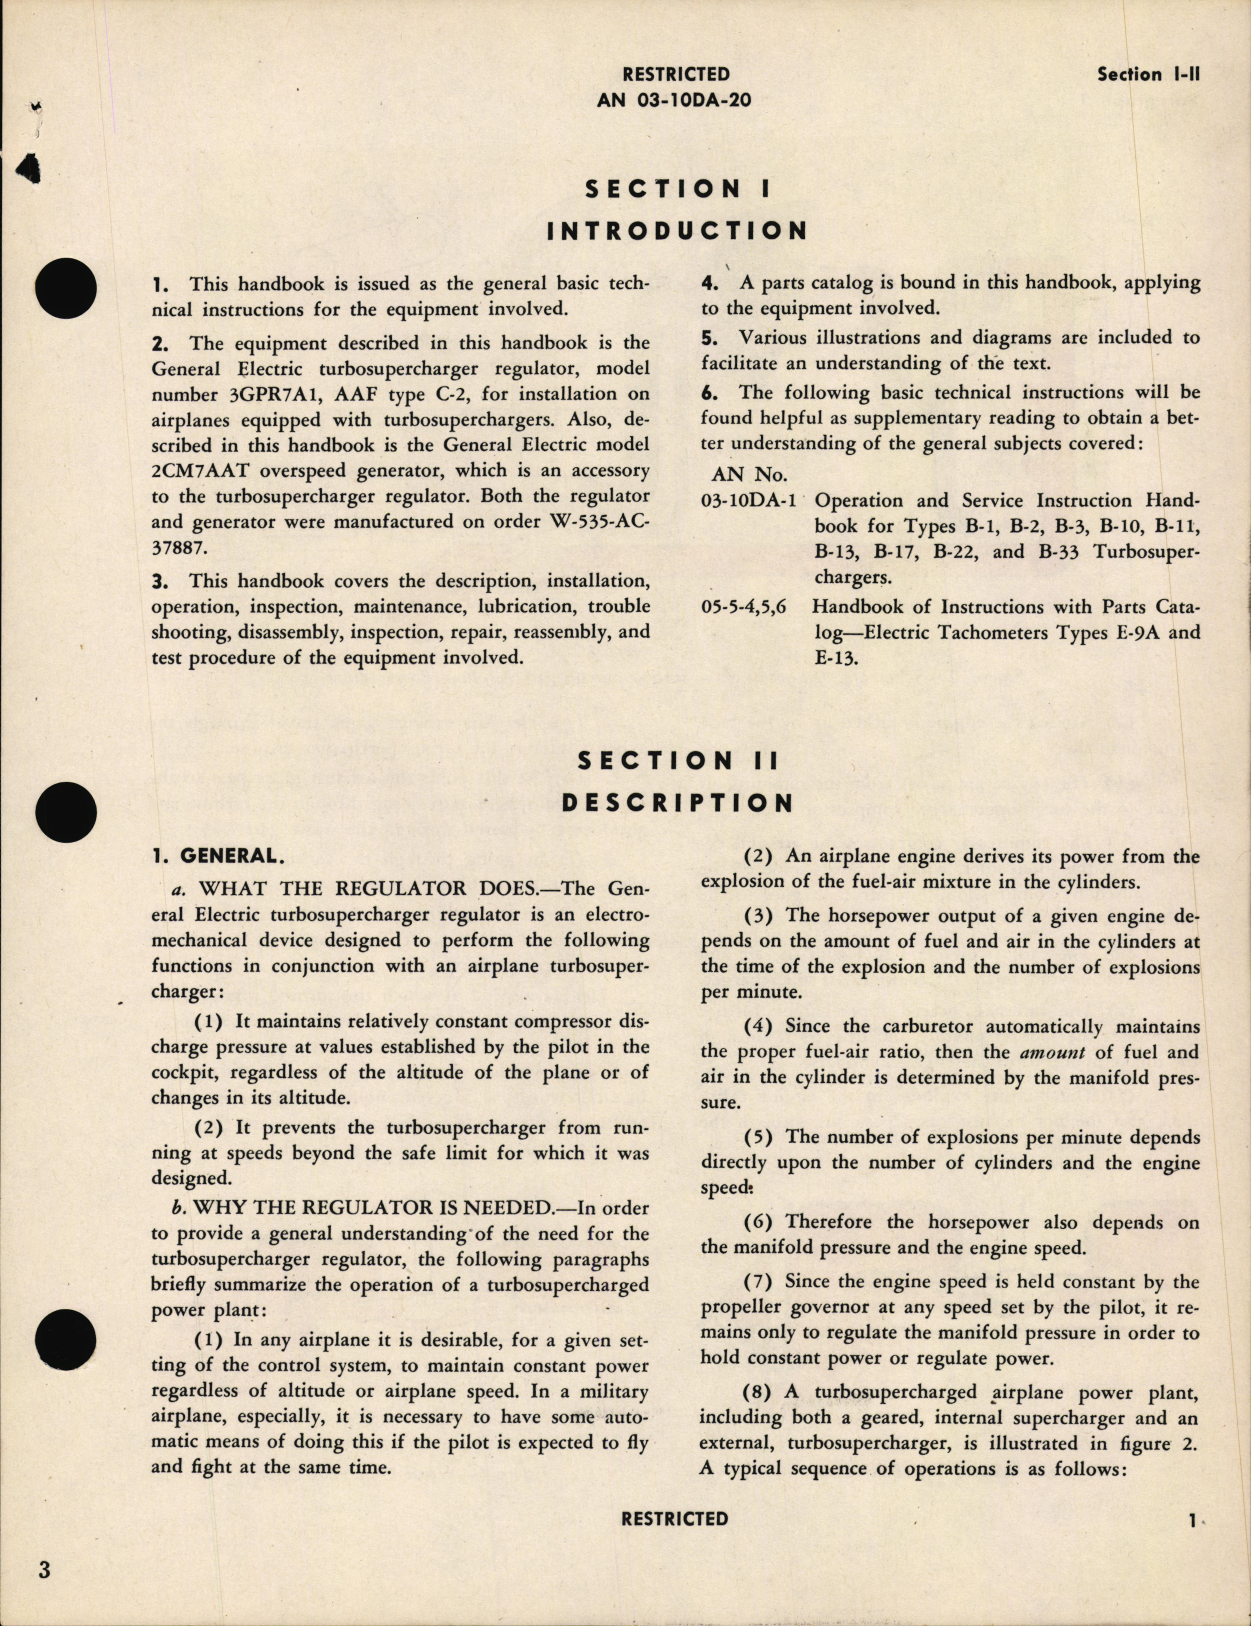 Sample page 5 from AirCorps Library document: Operation, Service, & Overhaul Instructions with Parts Catalog for Electric Regulator Turbosuperchargers Type C-2 Model 3GPR7A1